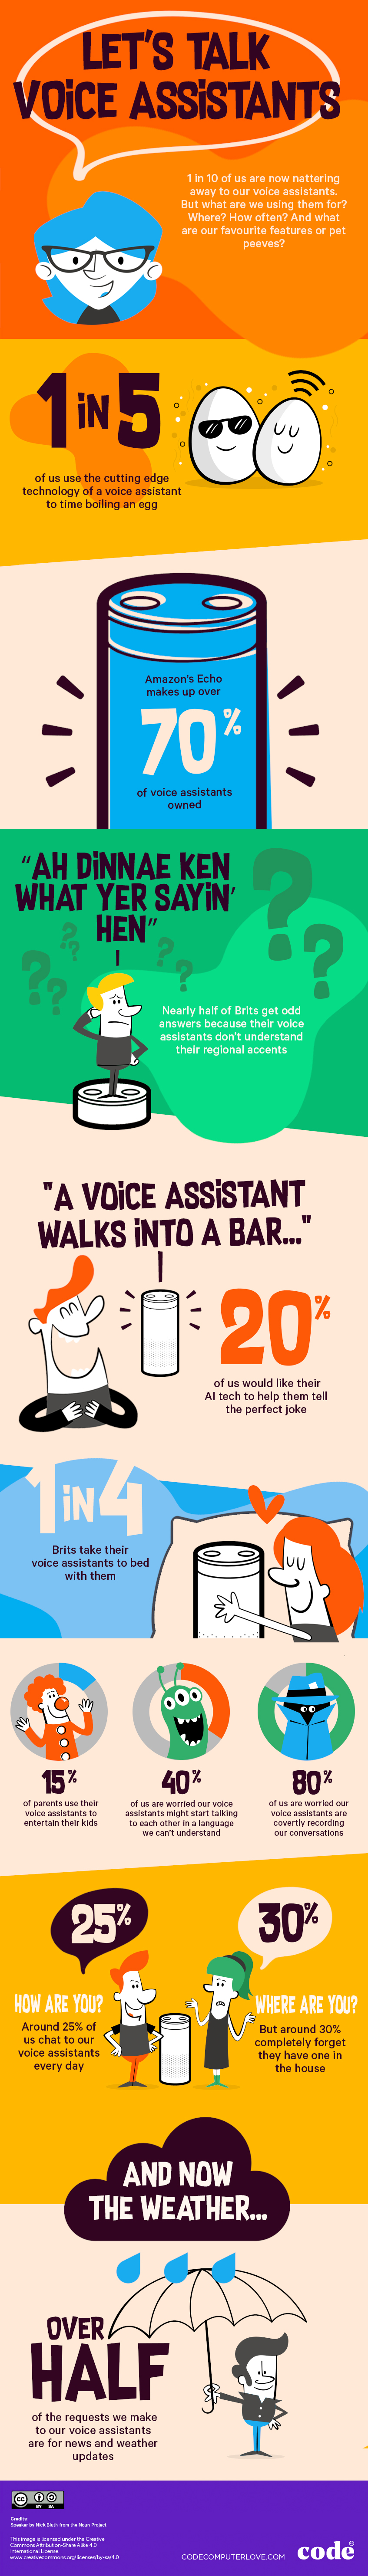 infographic on voice assistants